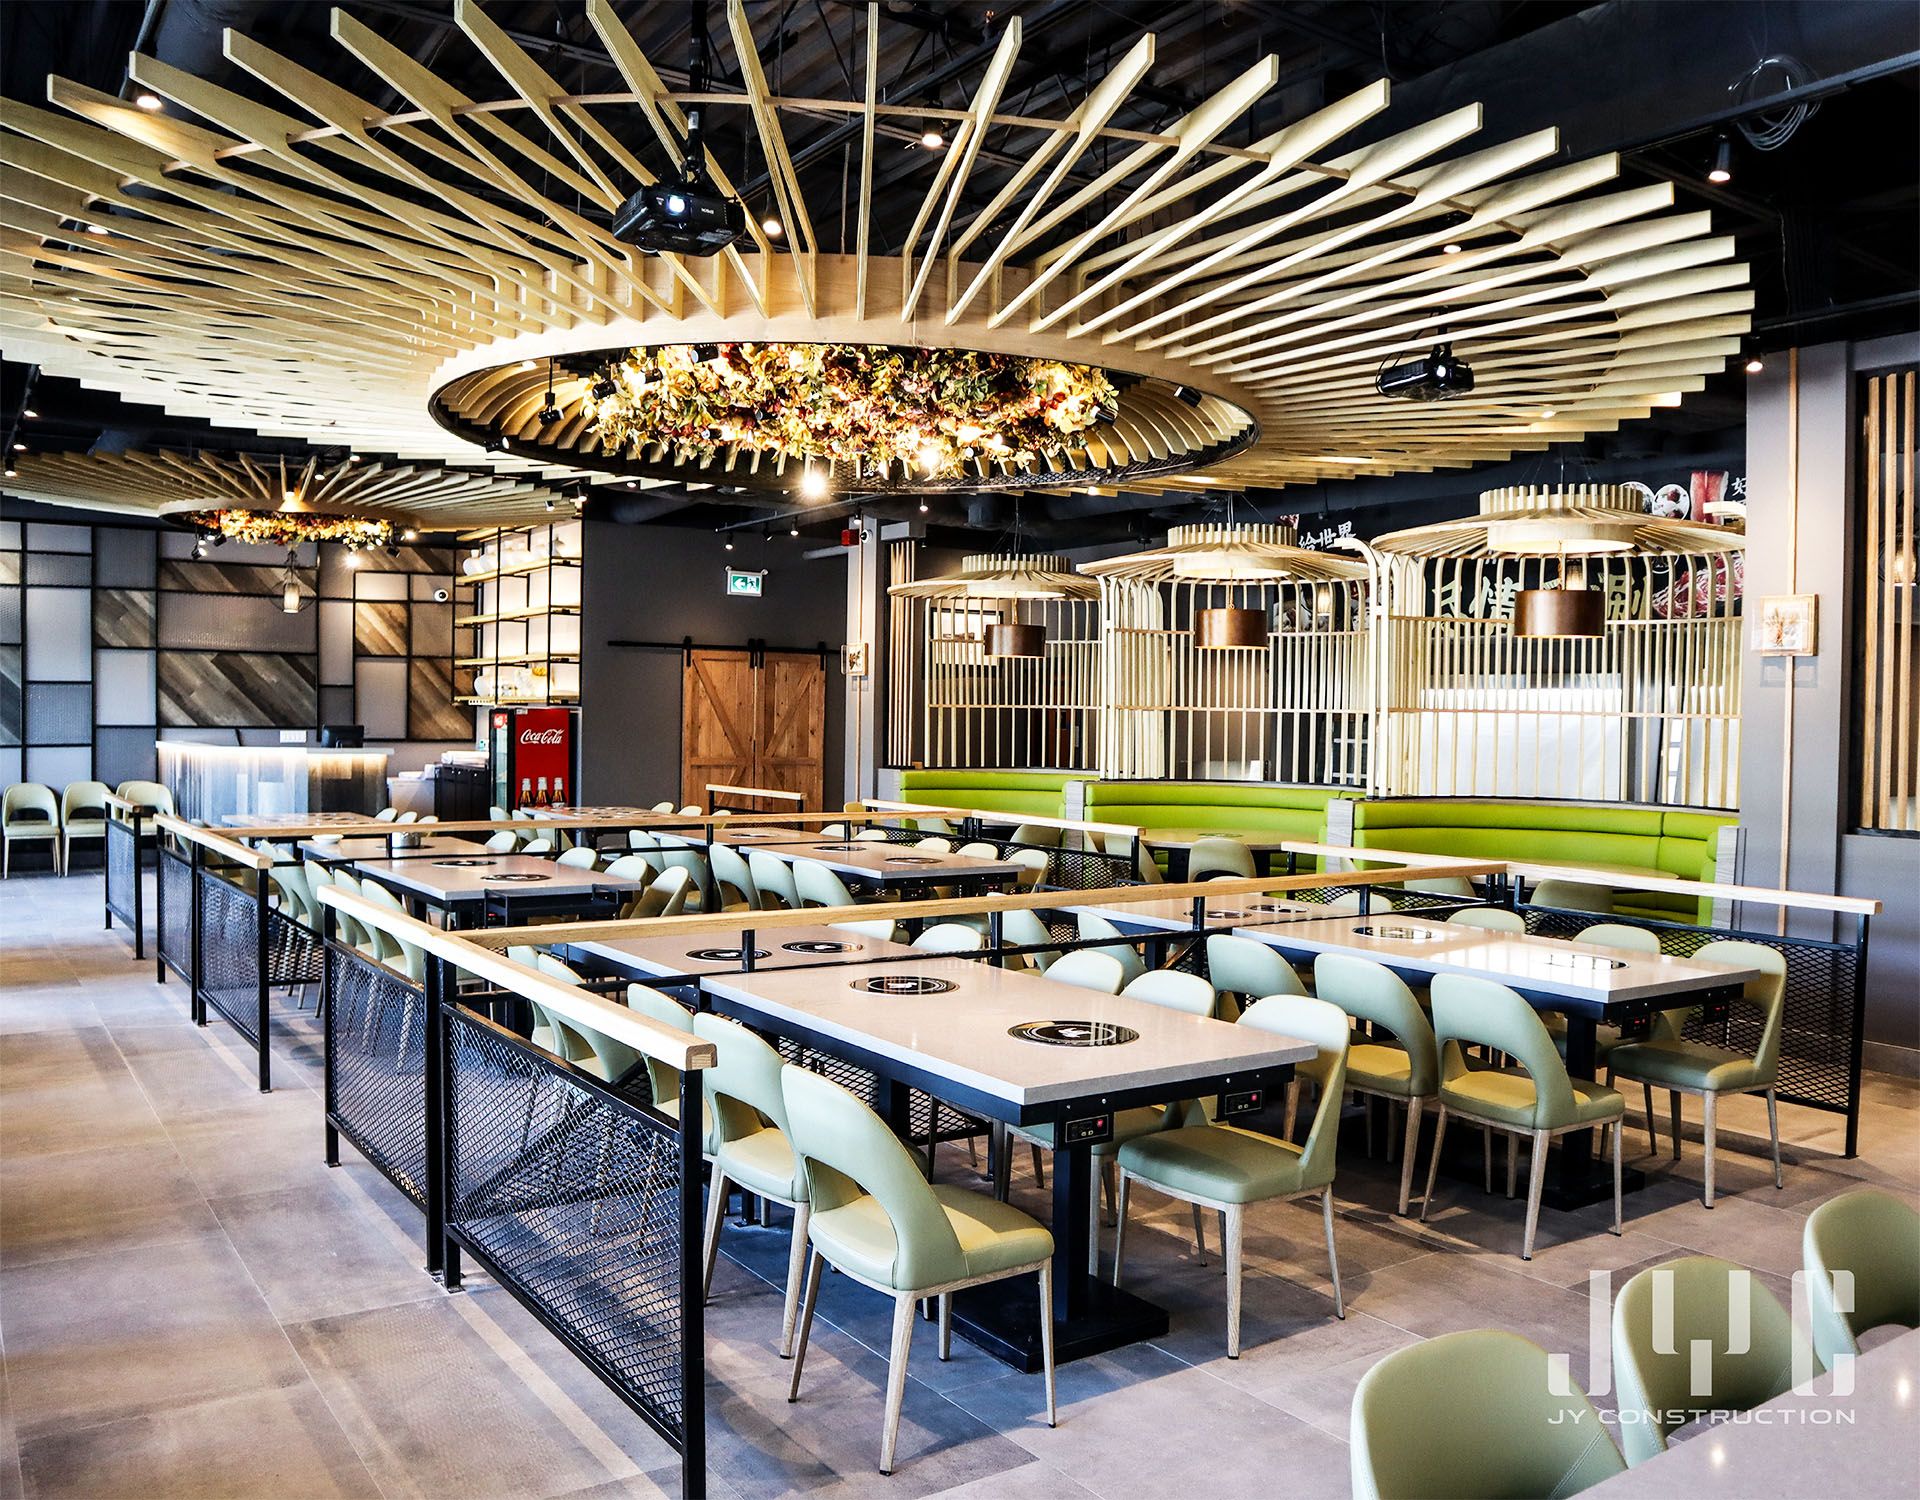 happy-lamb-hotpot-restaurant-design-in-scarborough-by-jy-construction-in-english-3.jpg